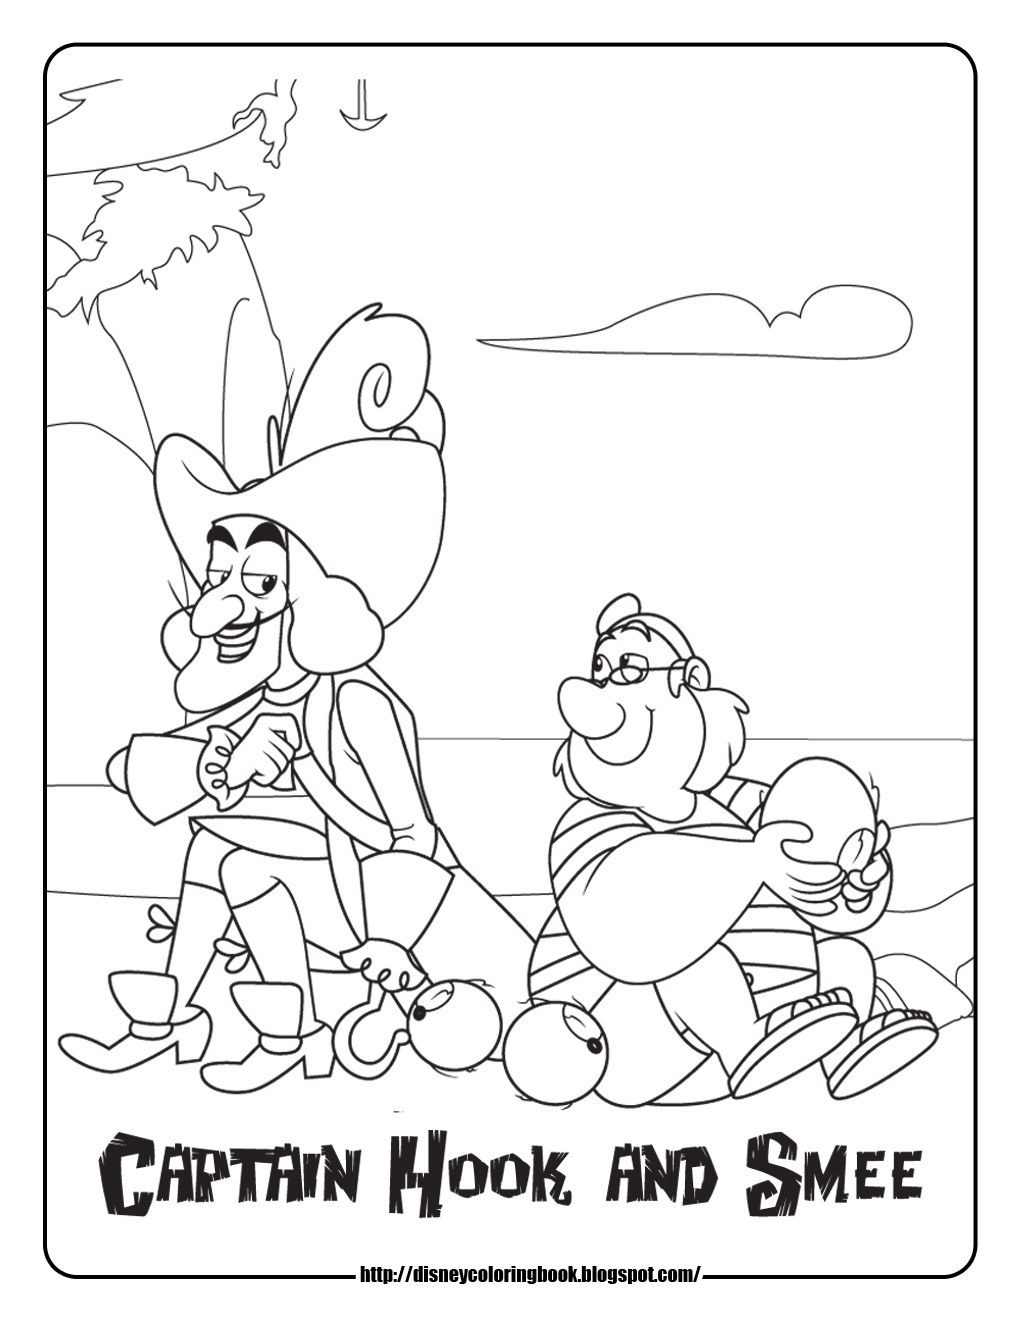 Disney Coloring Pages And Sheets For Kids Jake And The Neverland Pirates 2 Free Disney